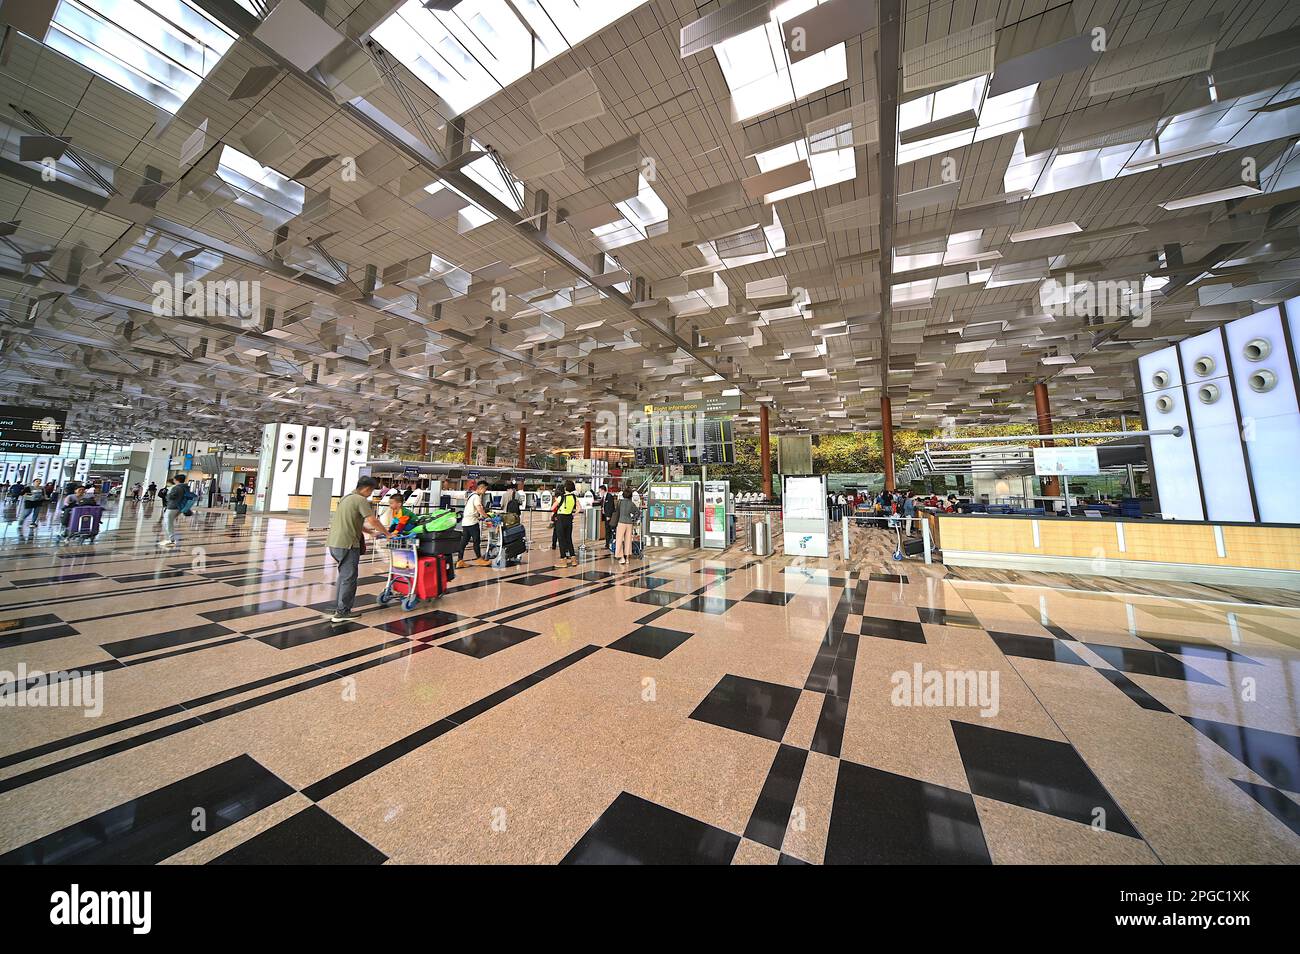 Changi Airport is a major international airport at the eastern end of Singapore, and is one of the largest transportation hubs in Asia. Terminal 3, lo Stock Photo